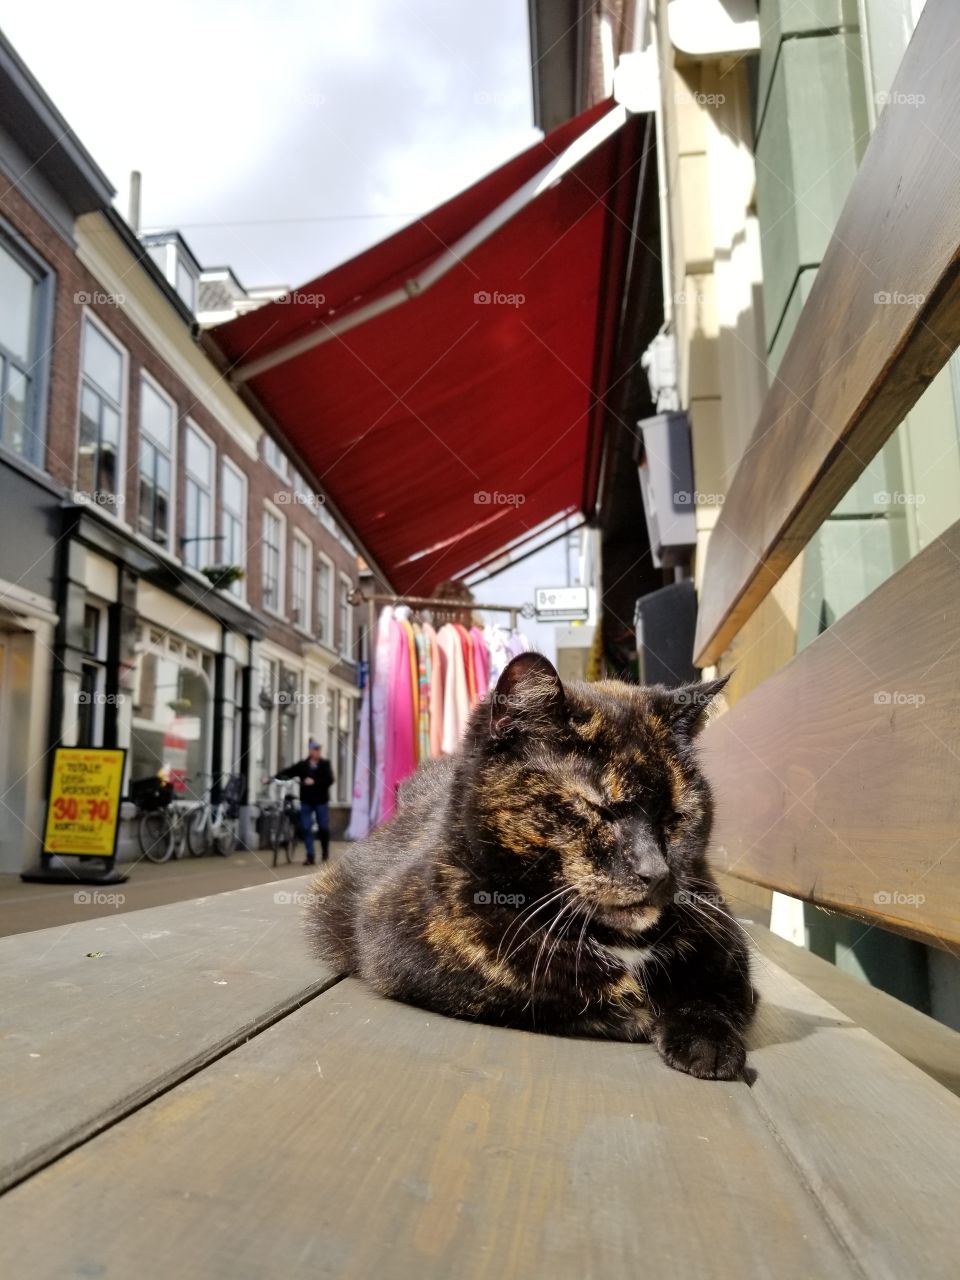 Wandering the town of Gorchem, as the many colored storefronts amble by, the many streets of cobble underfoot, this friendly feline caught mine eye. Basking as the hustle passes by. Lounging, purring, soaking up the midday sun. Abundant is the magic.